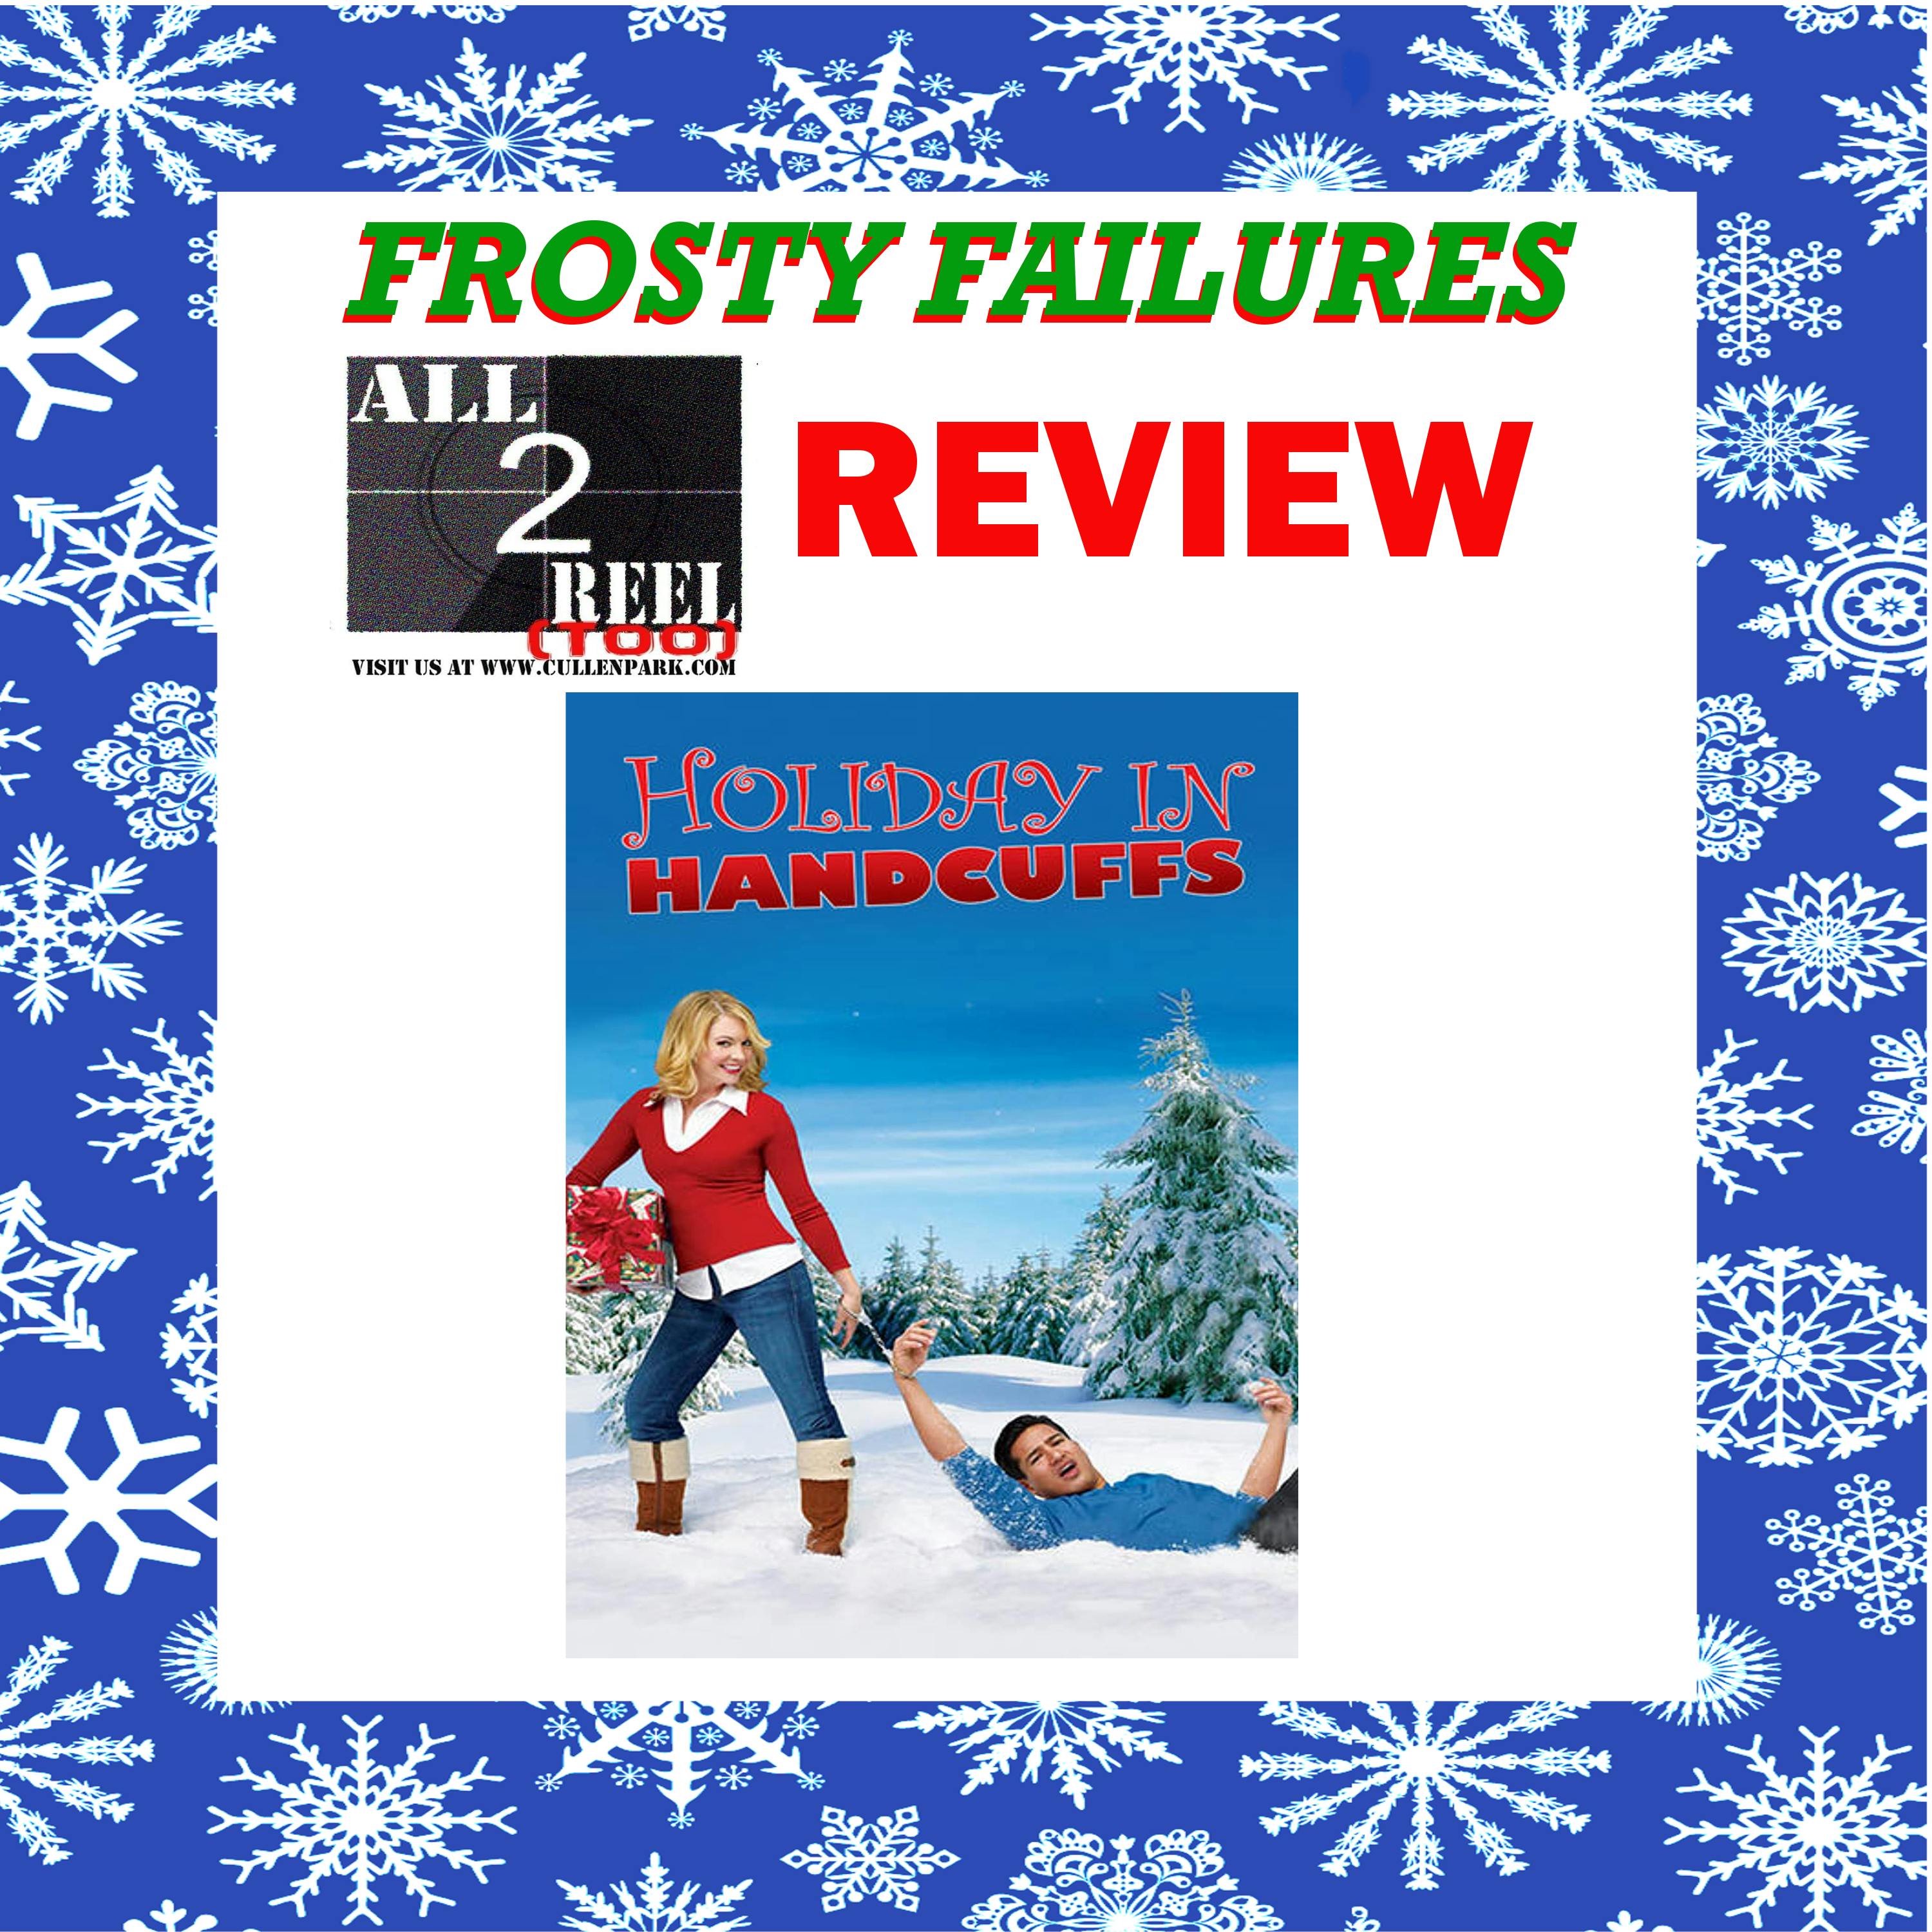 Holiday in Handcuffs (2006) - FROSTY FAILURES REVIEW Image